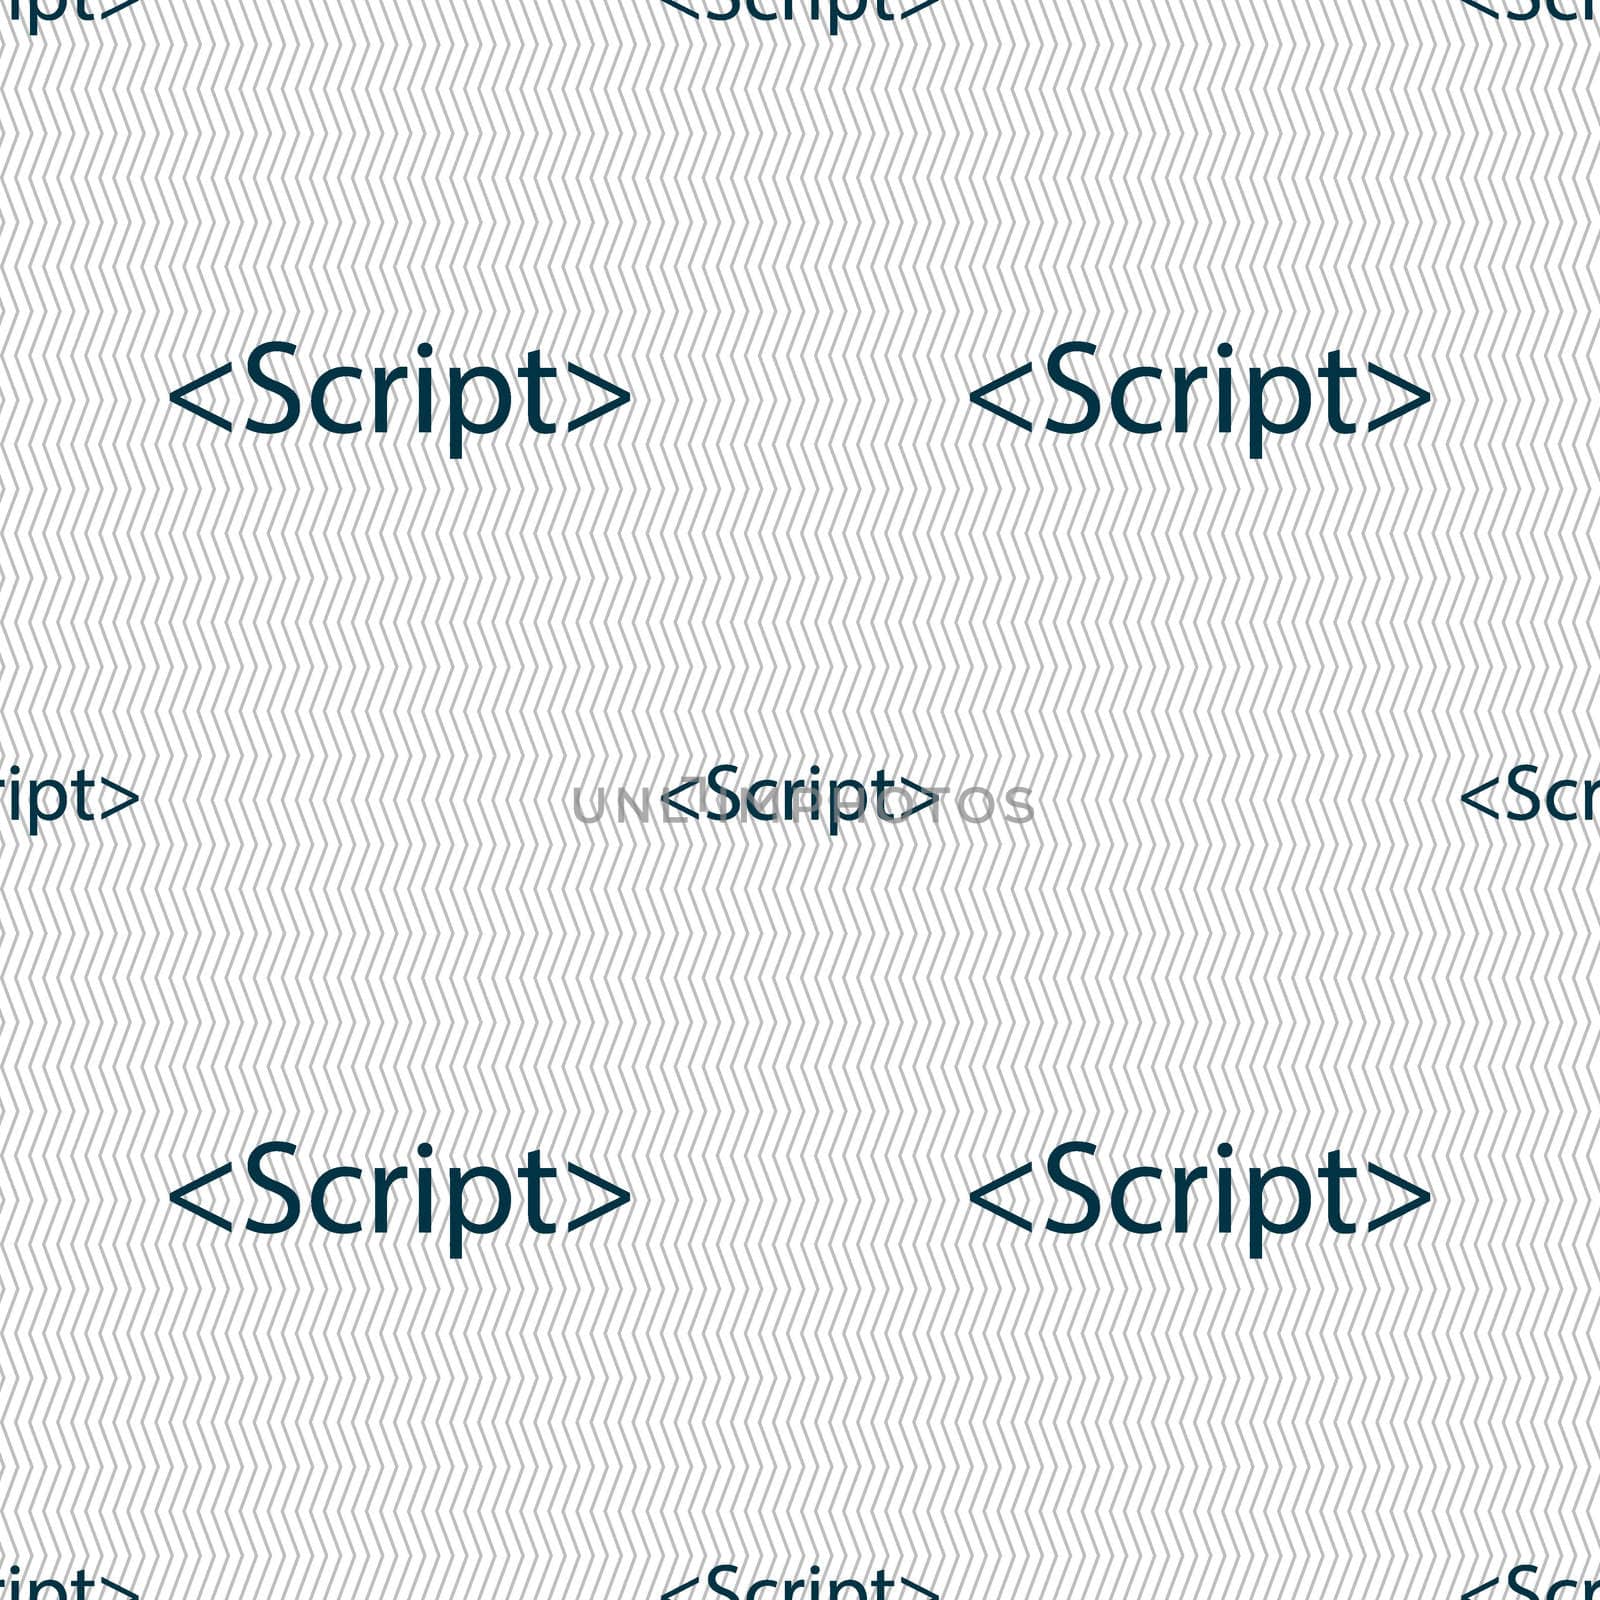 Script sign icon. Javascript code symbol. Seamless abstract background with geometric shapes. illustration